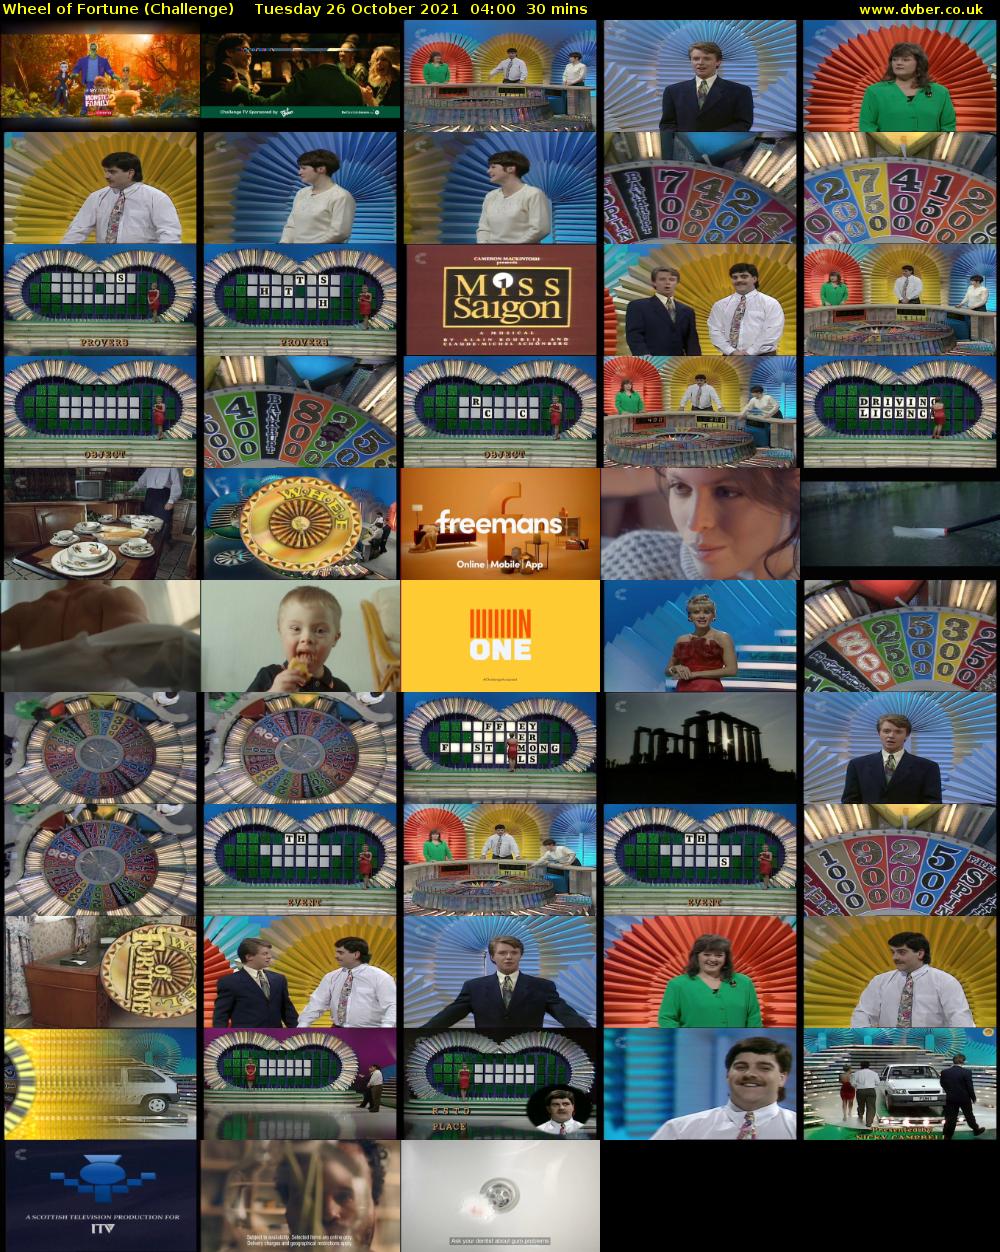 Wheel of Fortune (Challenge) Tuesday 26 October 2021 04:00 - 04:30